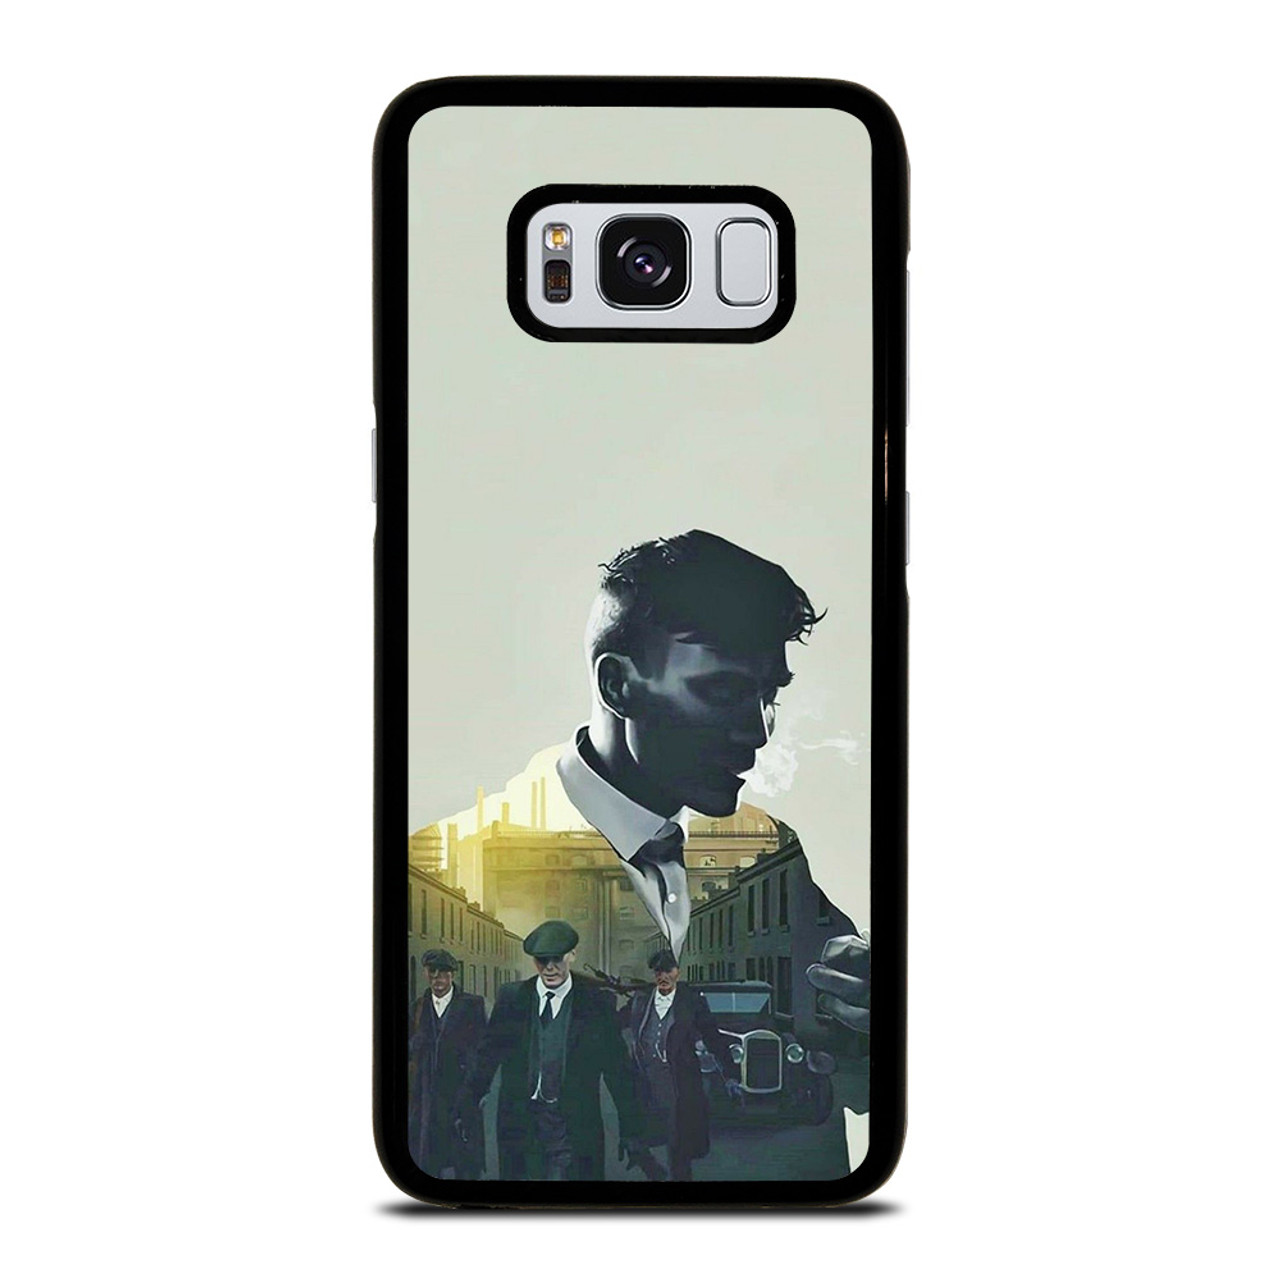 https://cdn11.bigcommerce.com/s-fuuucjkmh6/images/stencil/1280x1280/products/221224/258586/PEAKY%20BLINDERS%20TOMMY%20SHELBY%20ART__50796.1676012799.jpg?c=1